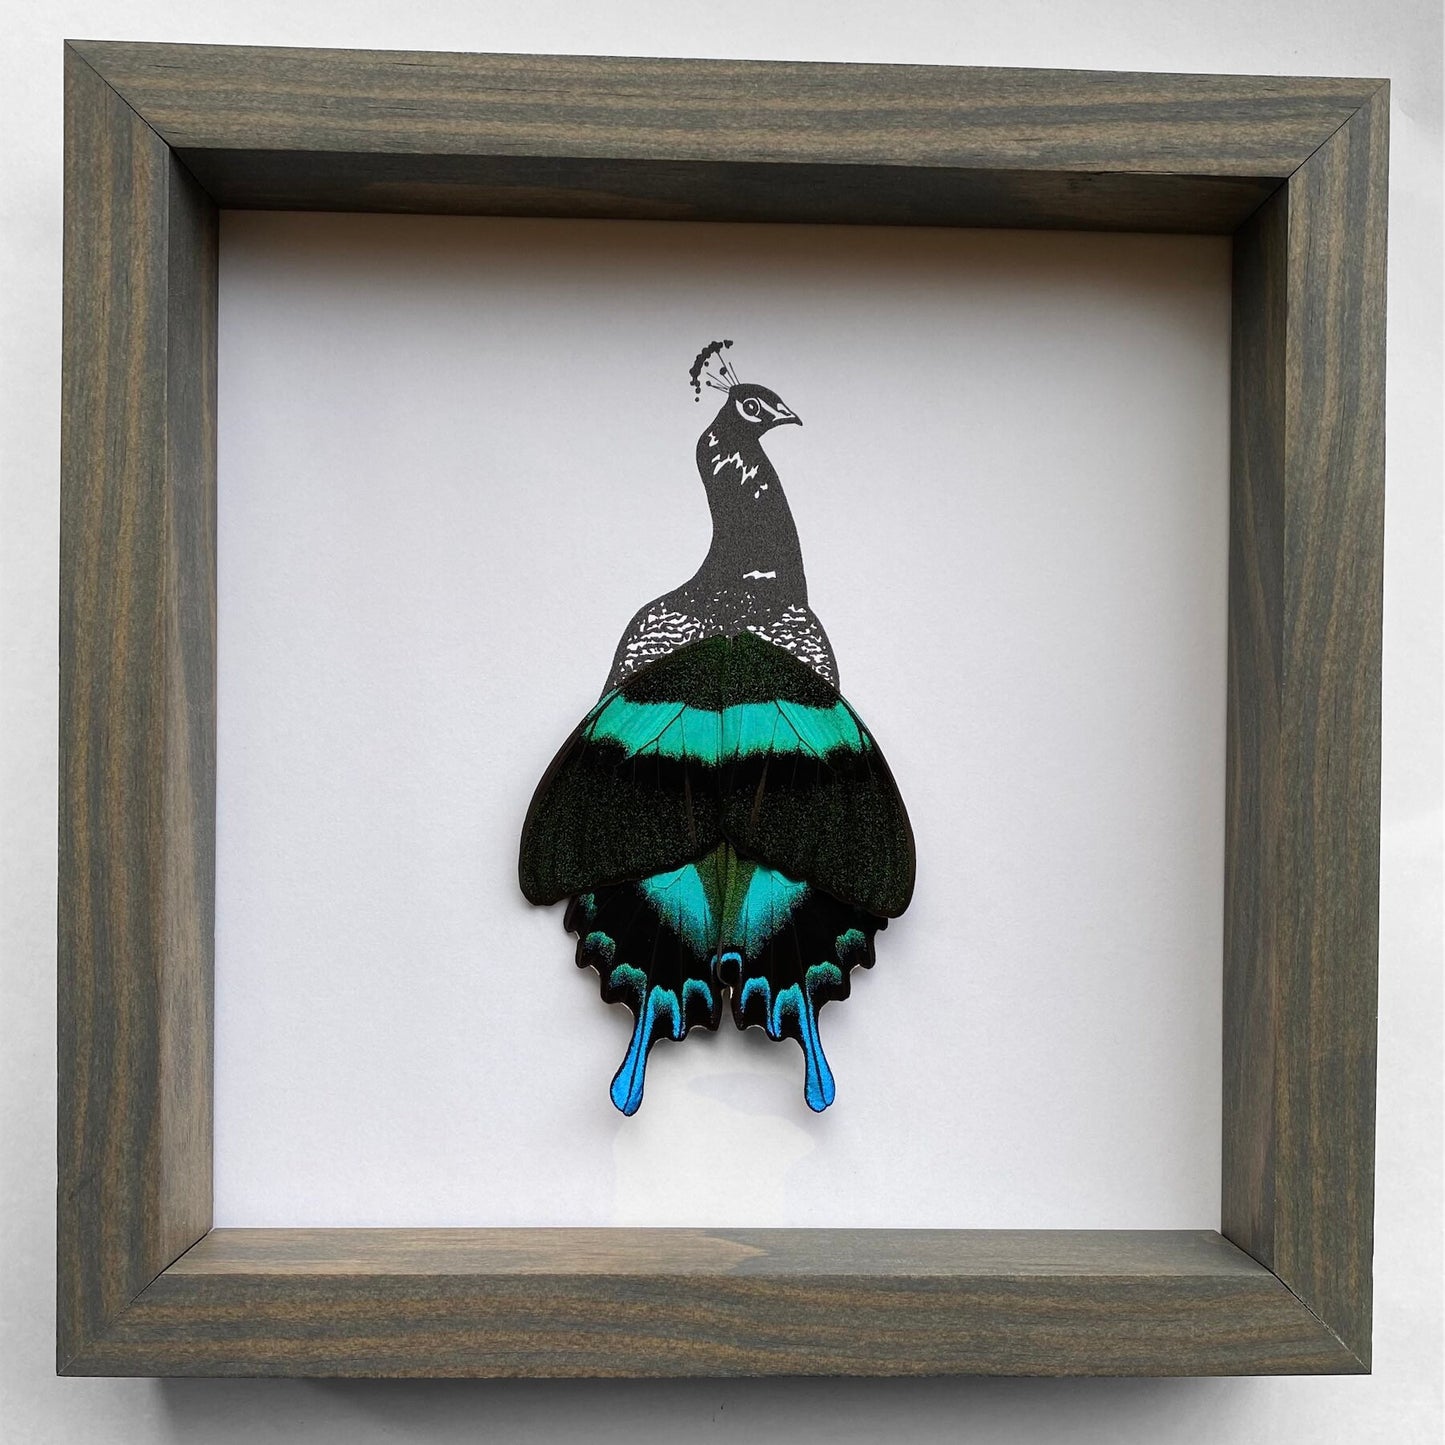 Peacock Real Butterfly Wing Art Ethically Sourced Made in MN USA - Holly Ulm - Isms Butterfly Conservation Art